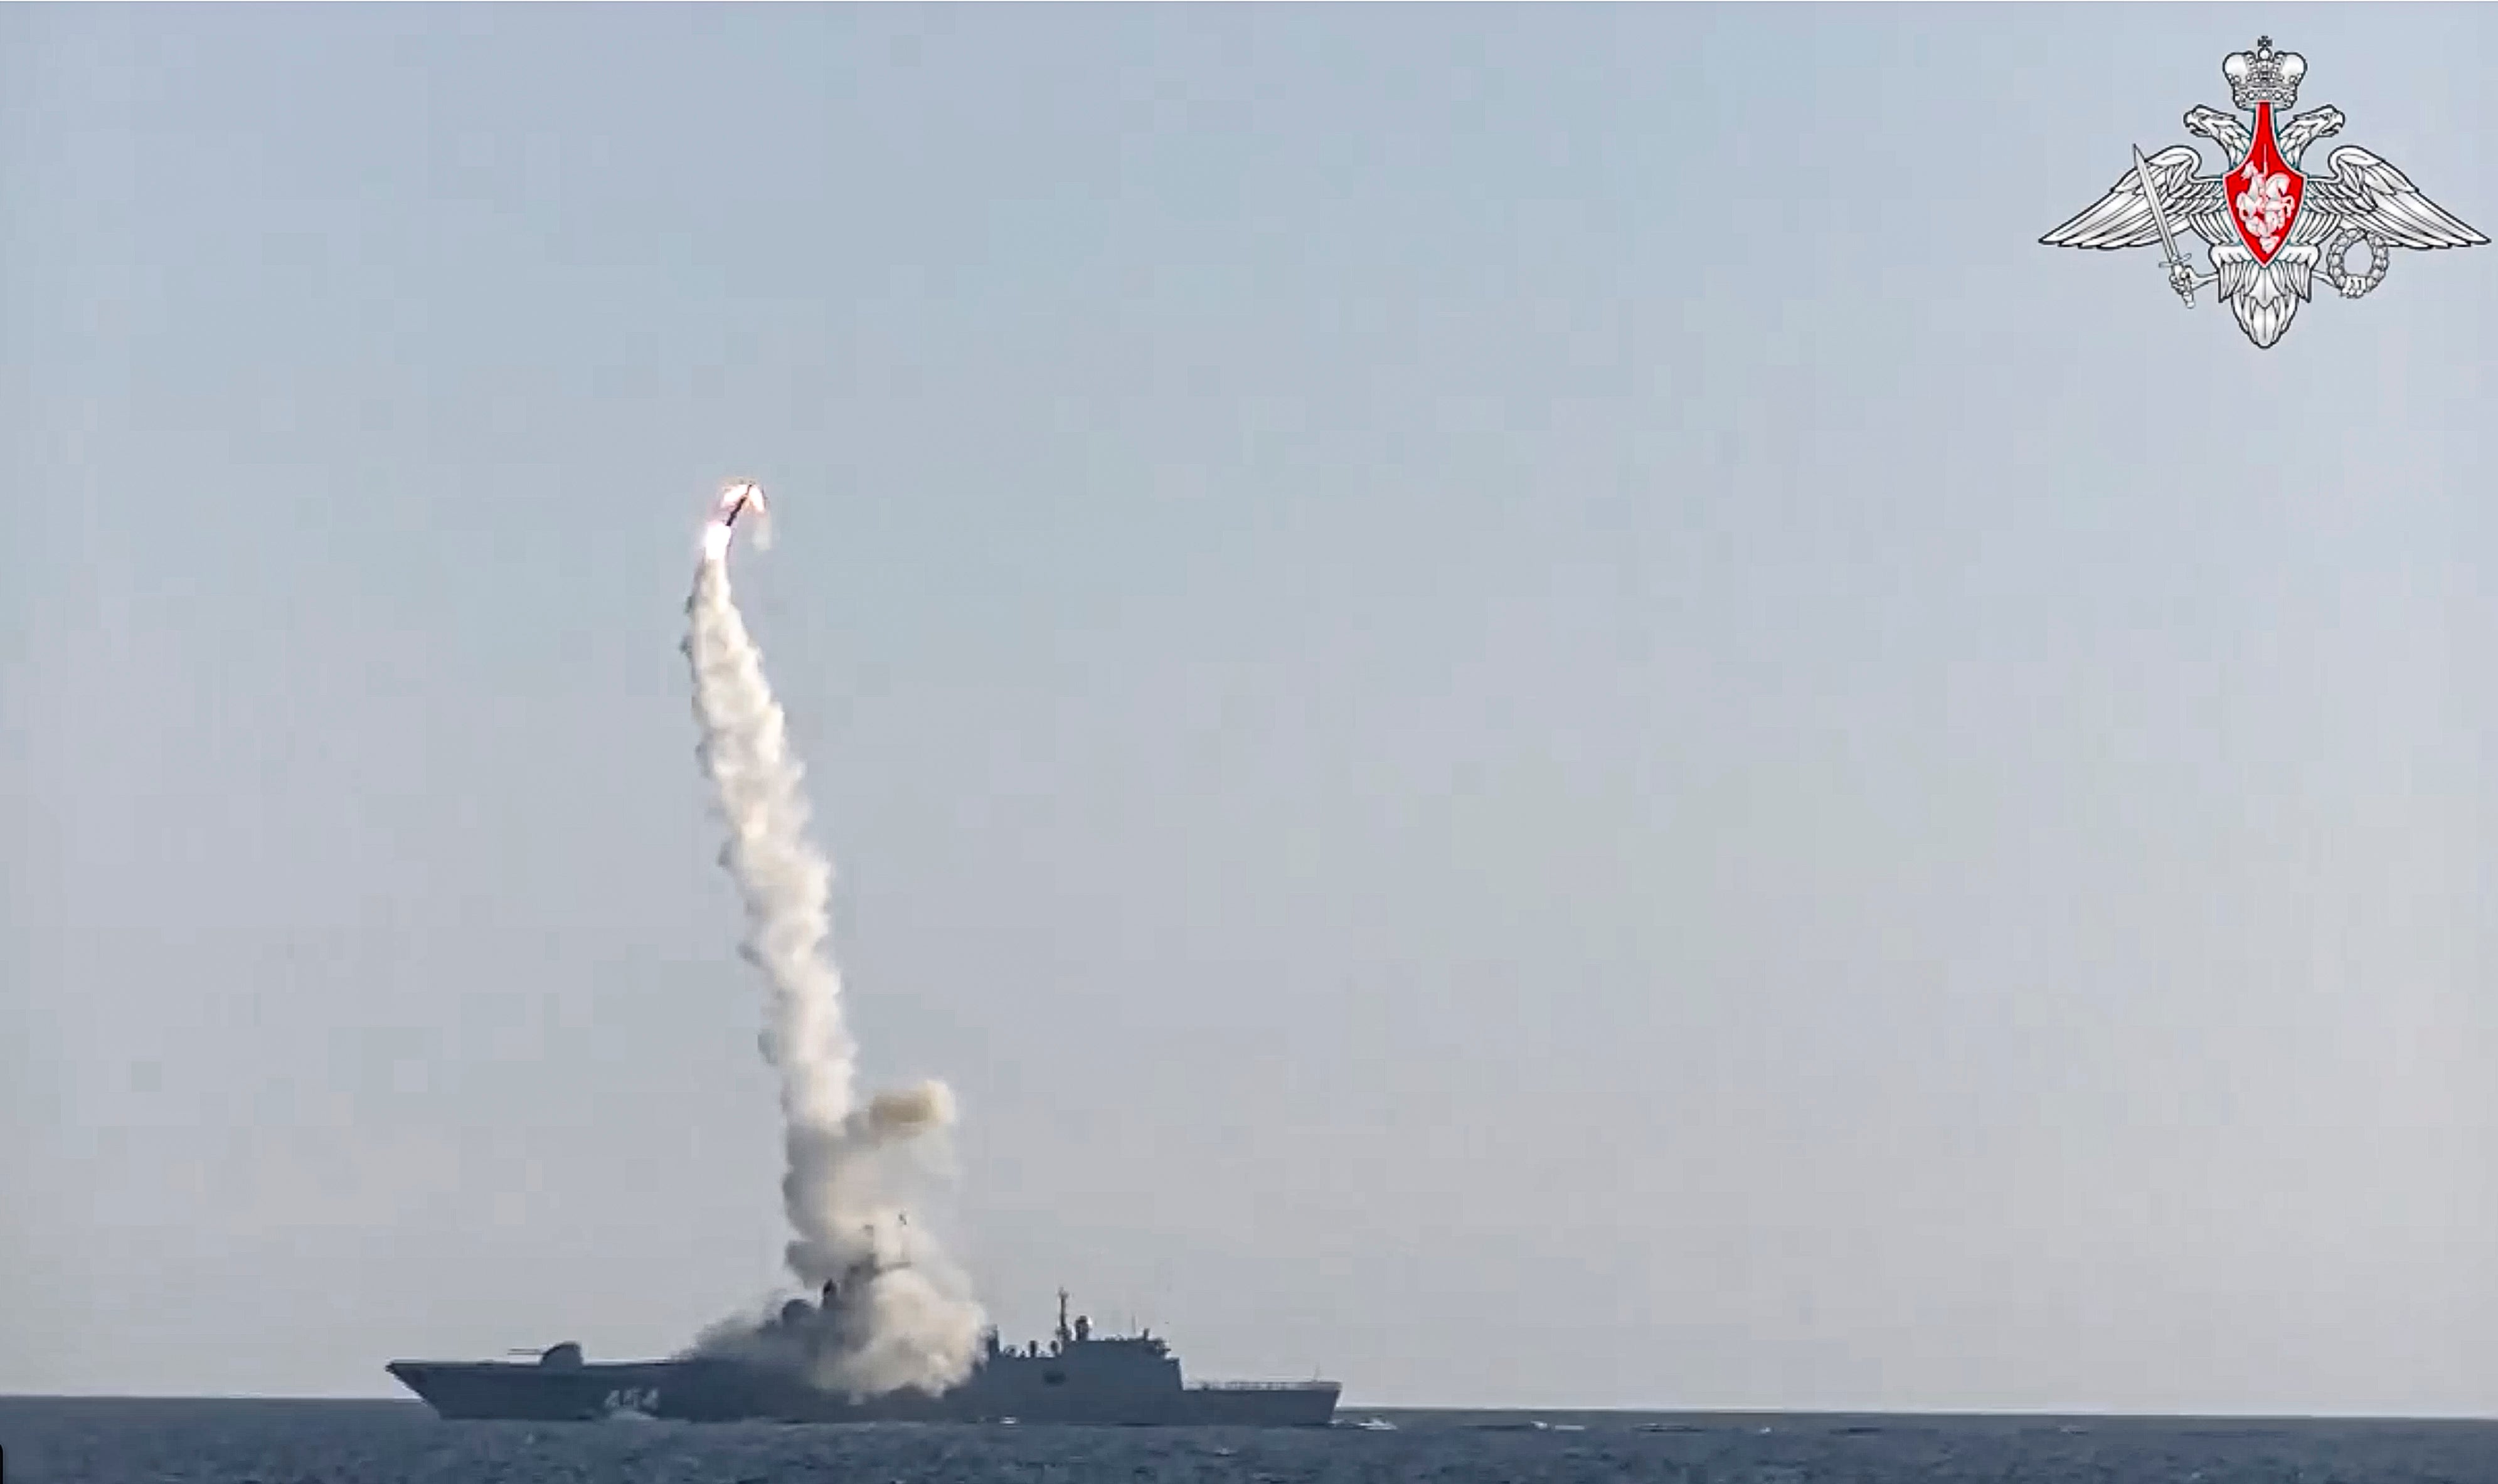 A new Zircon hypersonic cruise missile is launched by the frigate Admiral Gorshkov by the Russian navy from the White Sea